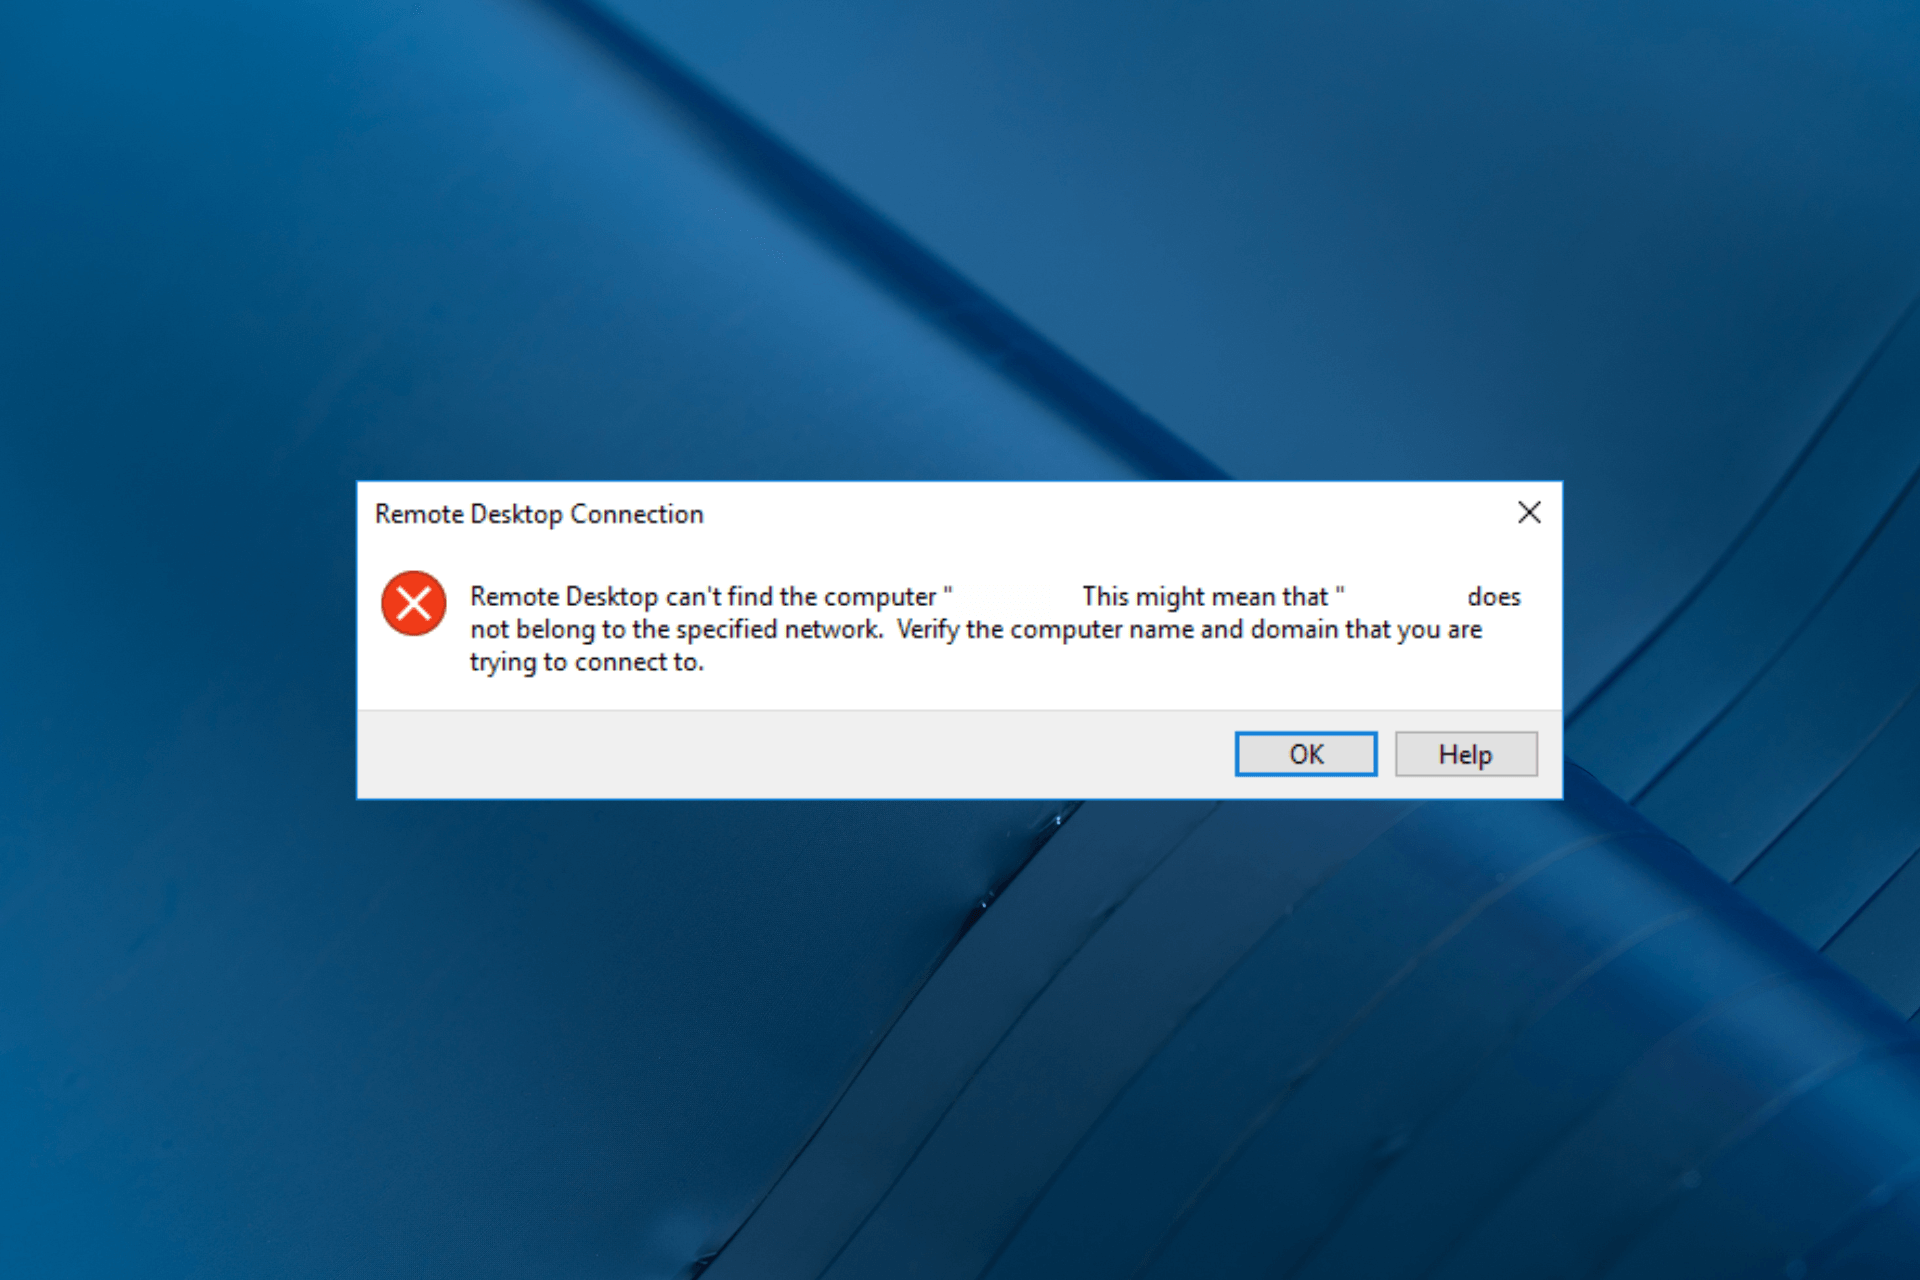 remote desktop can't find the computer